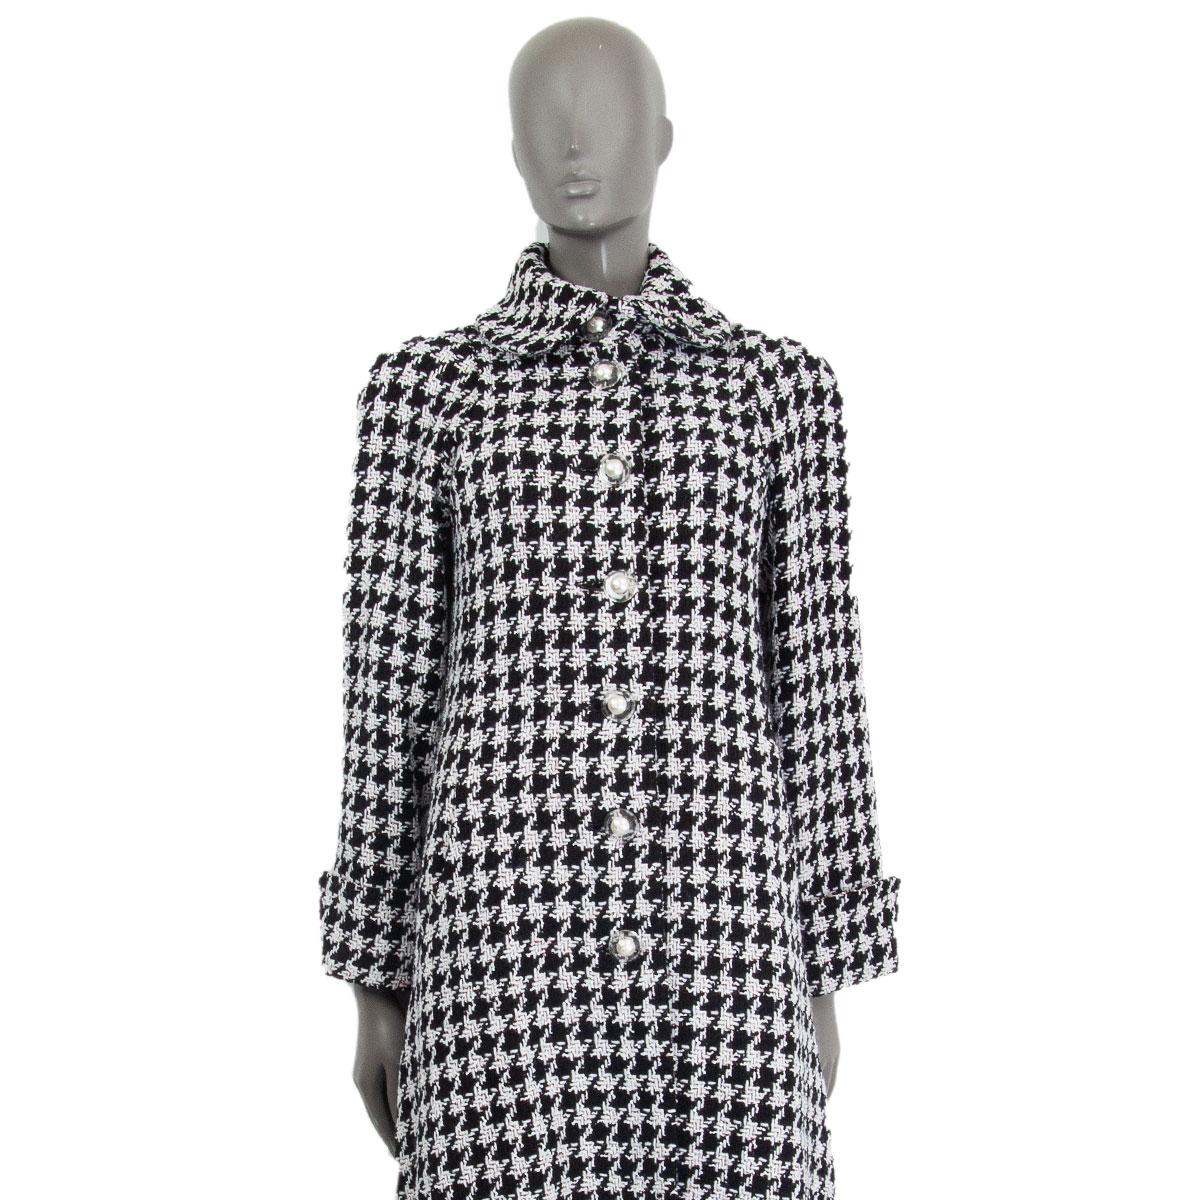 Chanel 2017 houndstooth flared tweed coat in black, white, red and gold polyamide (40%), wool (20%), acetate (14%), acrylic (14%), cotton (10%) and polyester (2%) with a Peter Pan collar, padded shouders, front slit pockets and folded cuffs. Closes